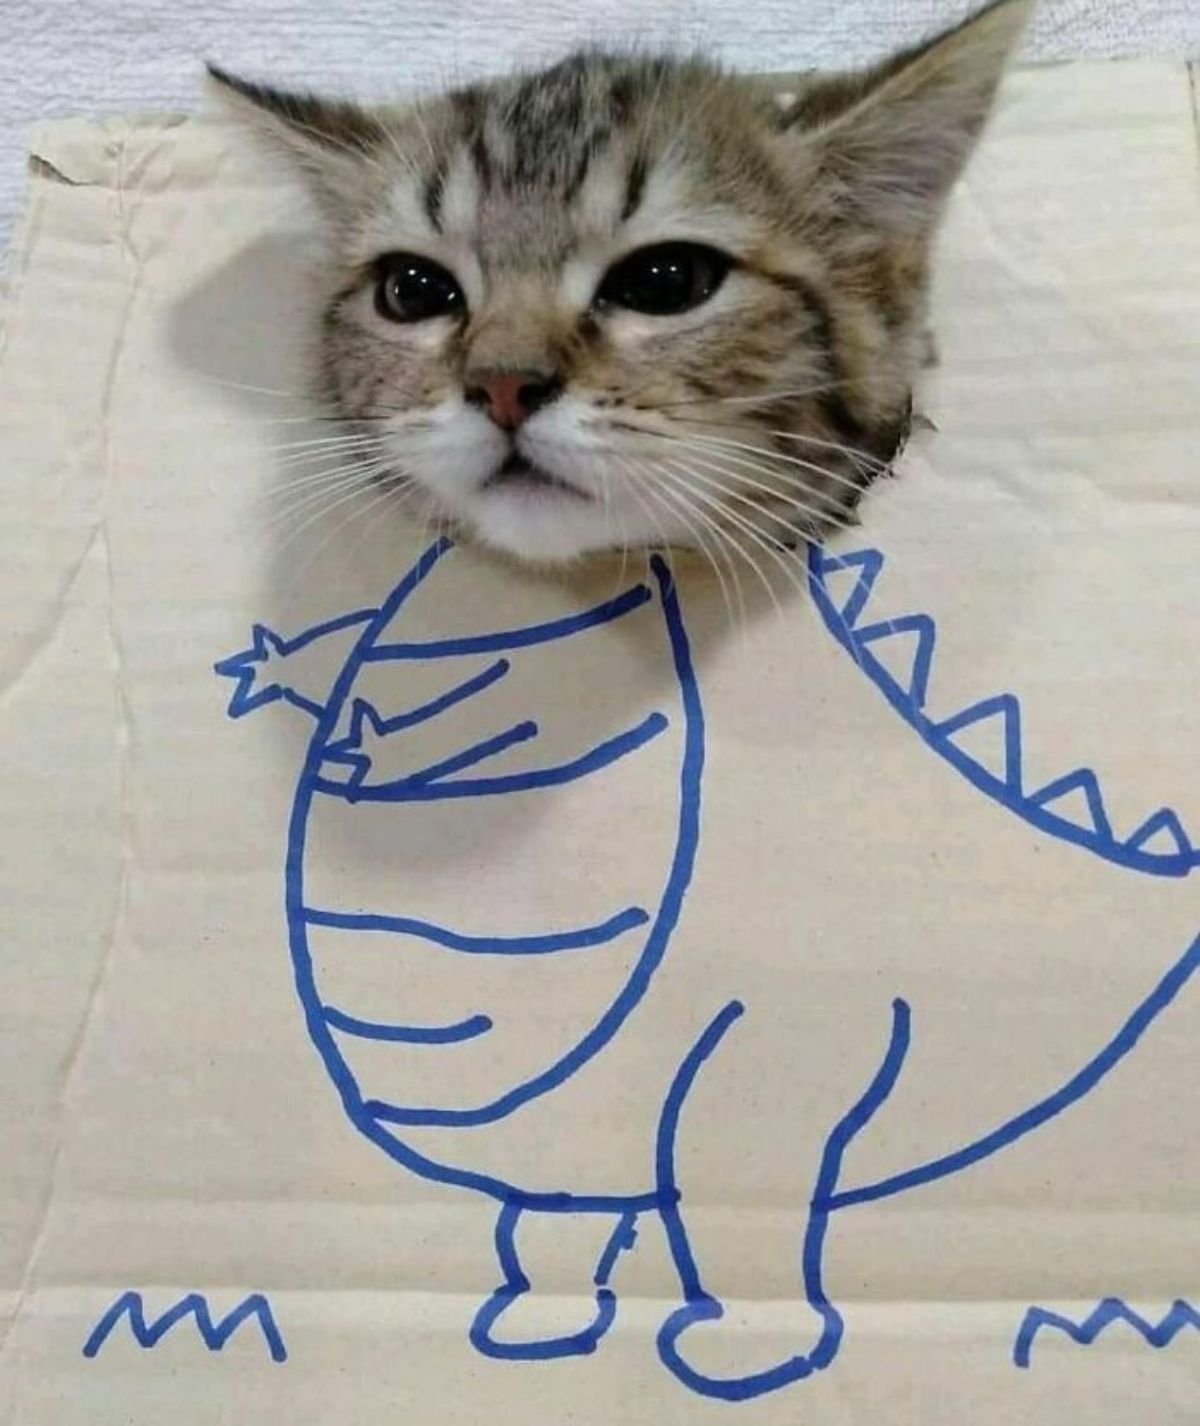 brown and white tabby kitten head poking out of a white cardboard with a blue marker drawing of a dinosaur body under it